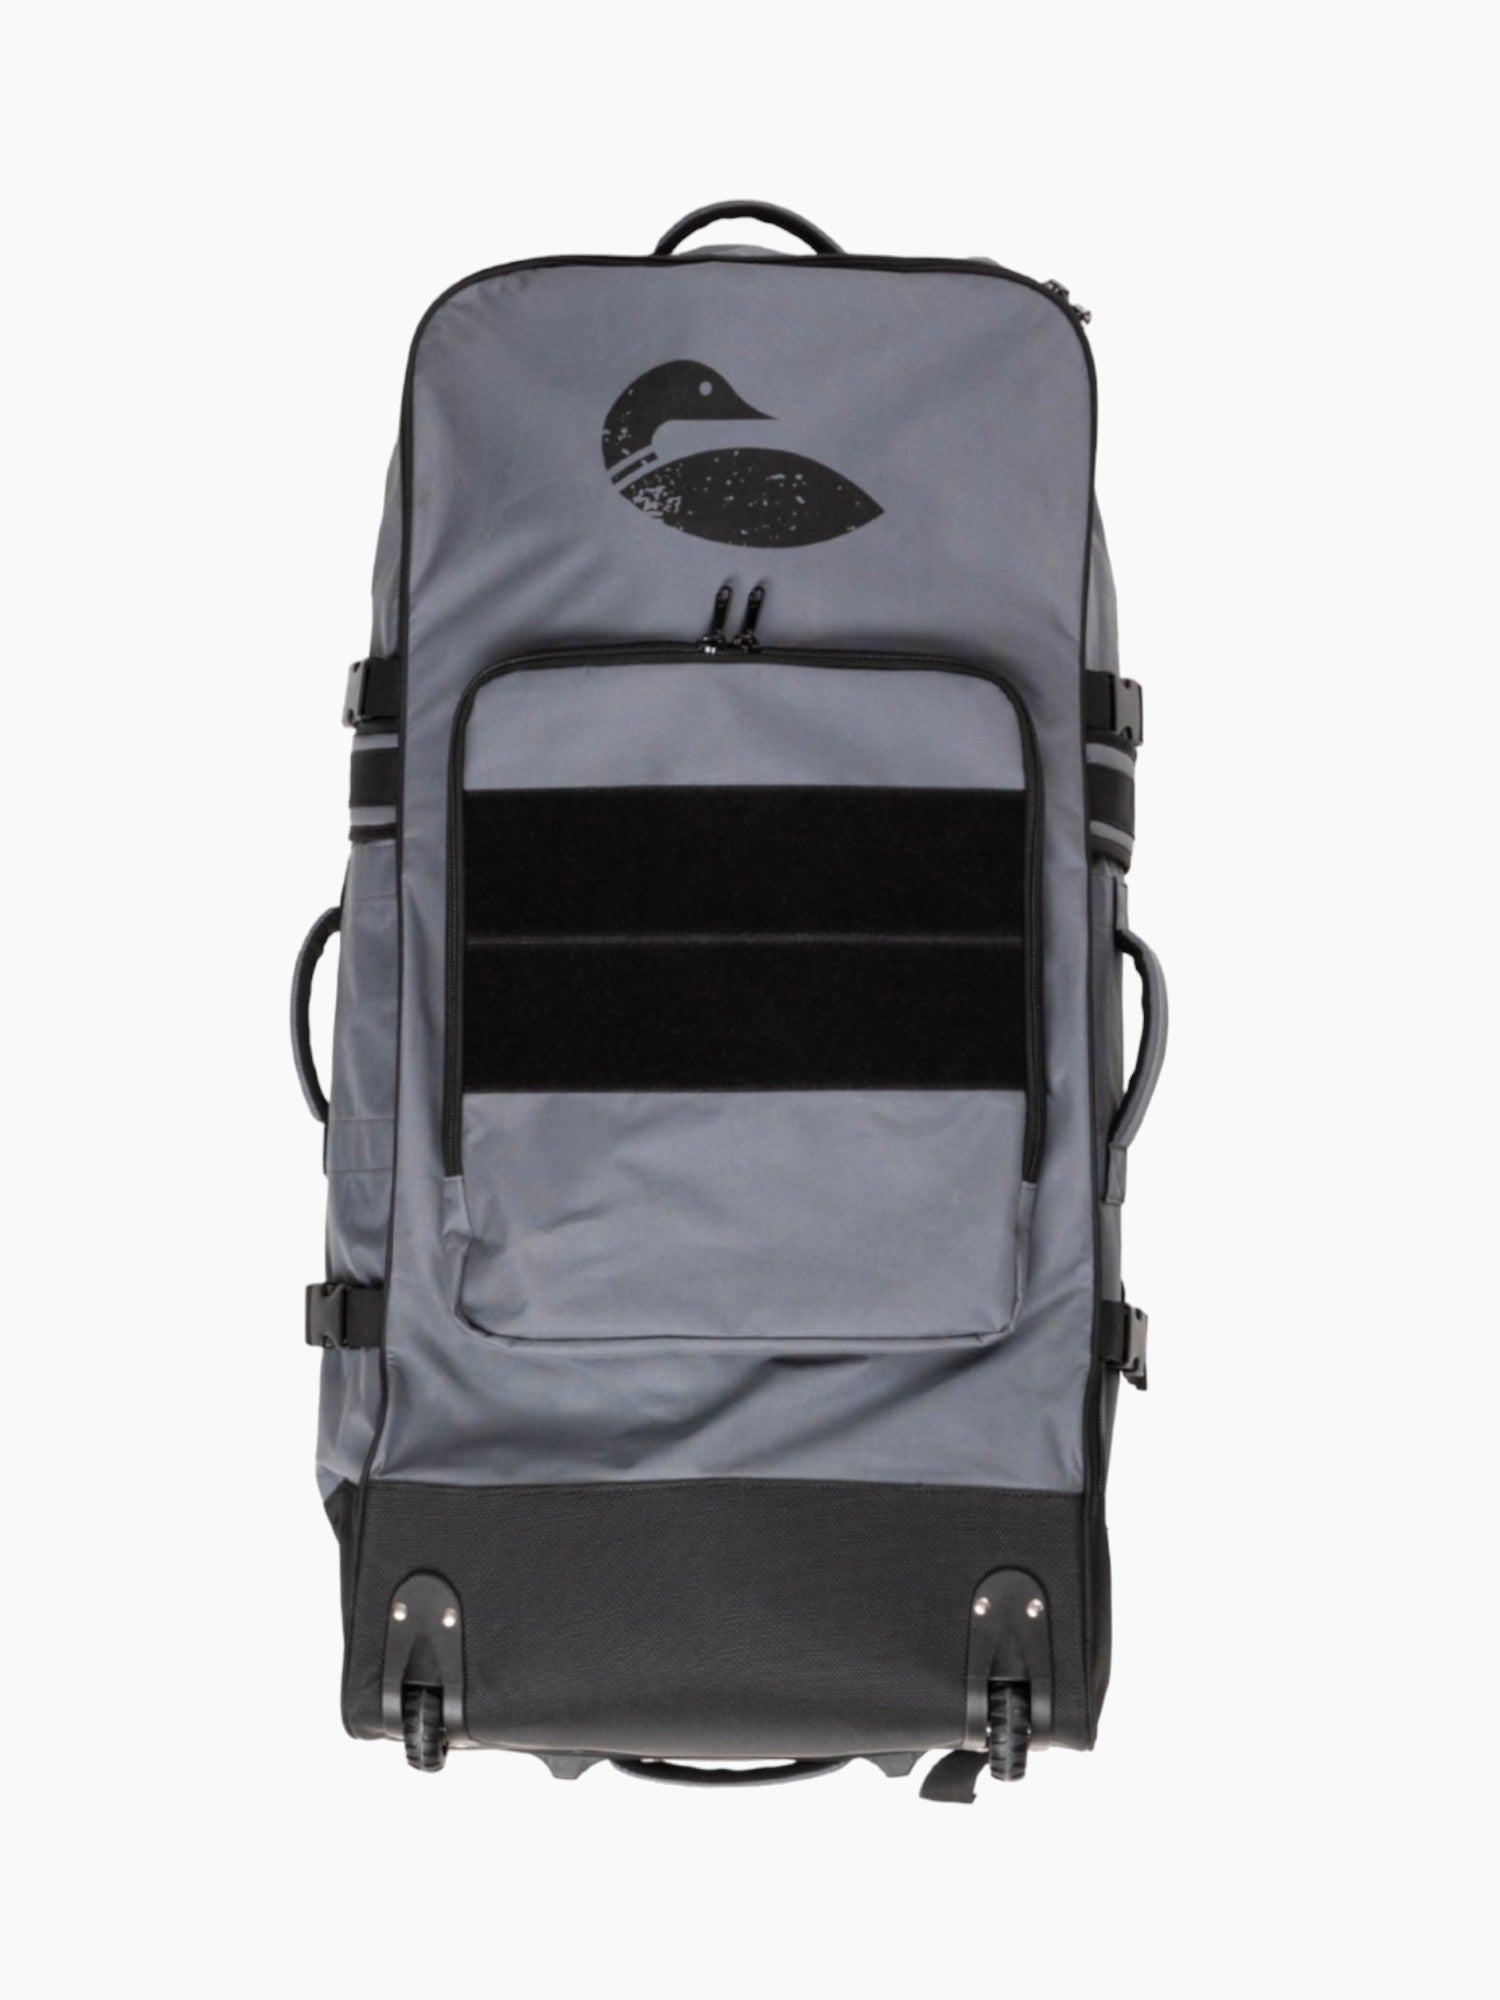 Grey roller bag with black accents with the paddle north loon logo on it.